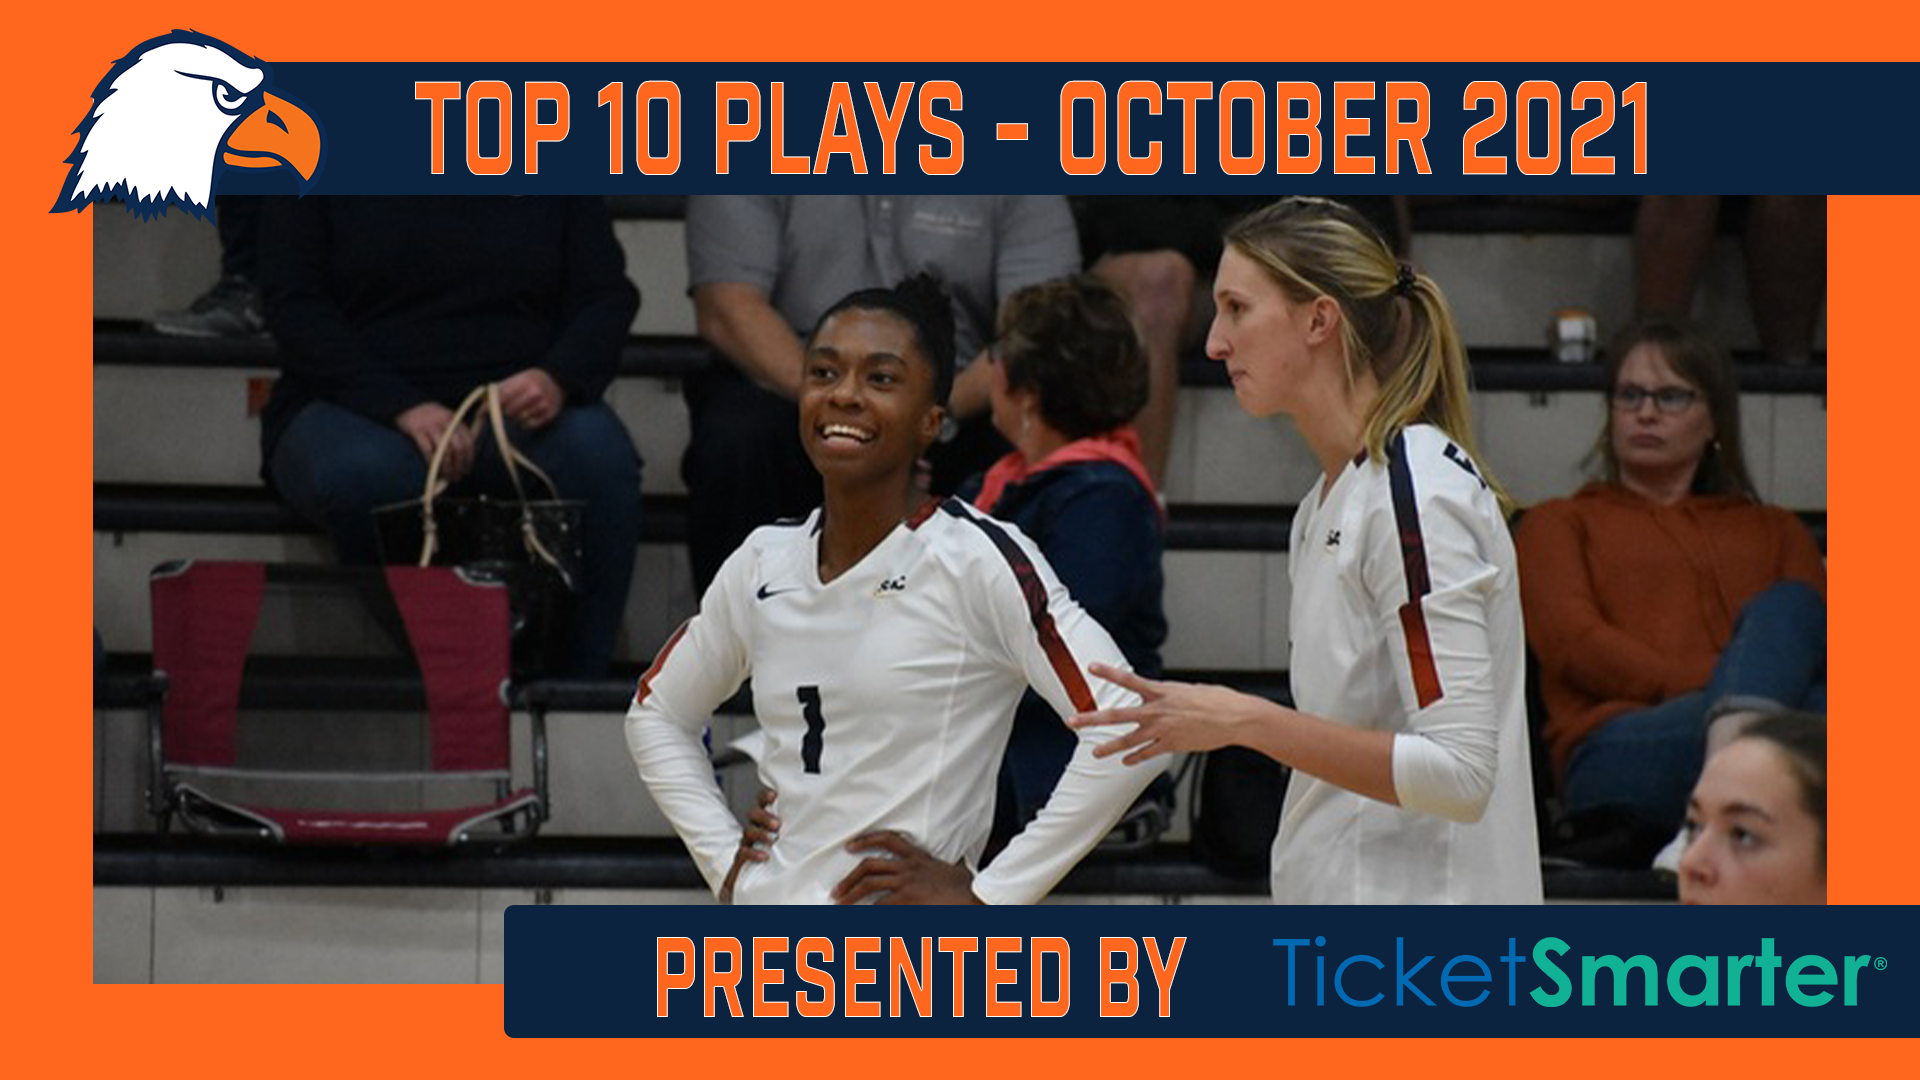 Eagle Sports Network releases Ticketsmarter top 10 plays for the month of October